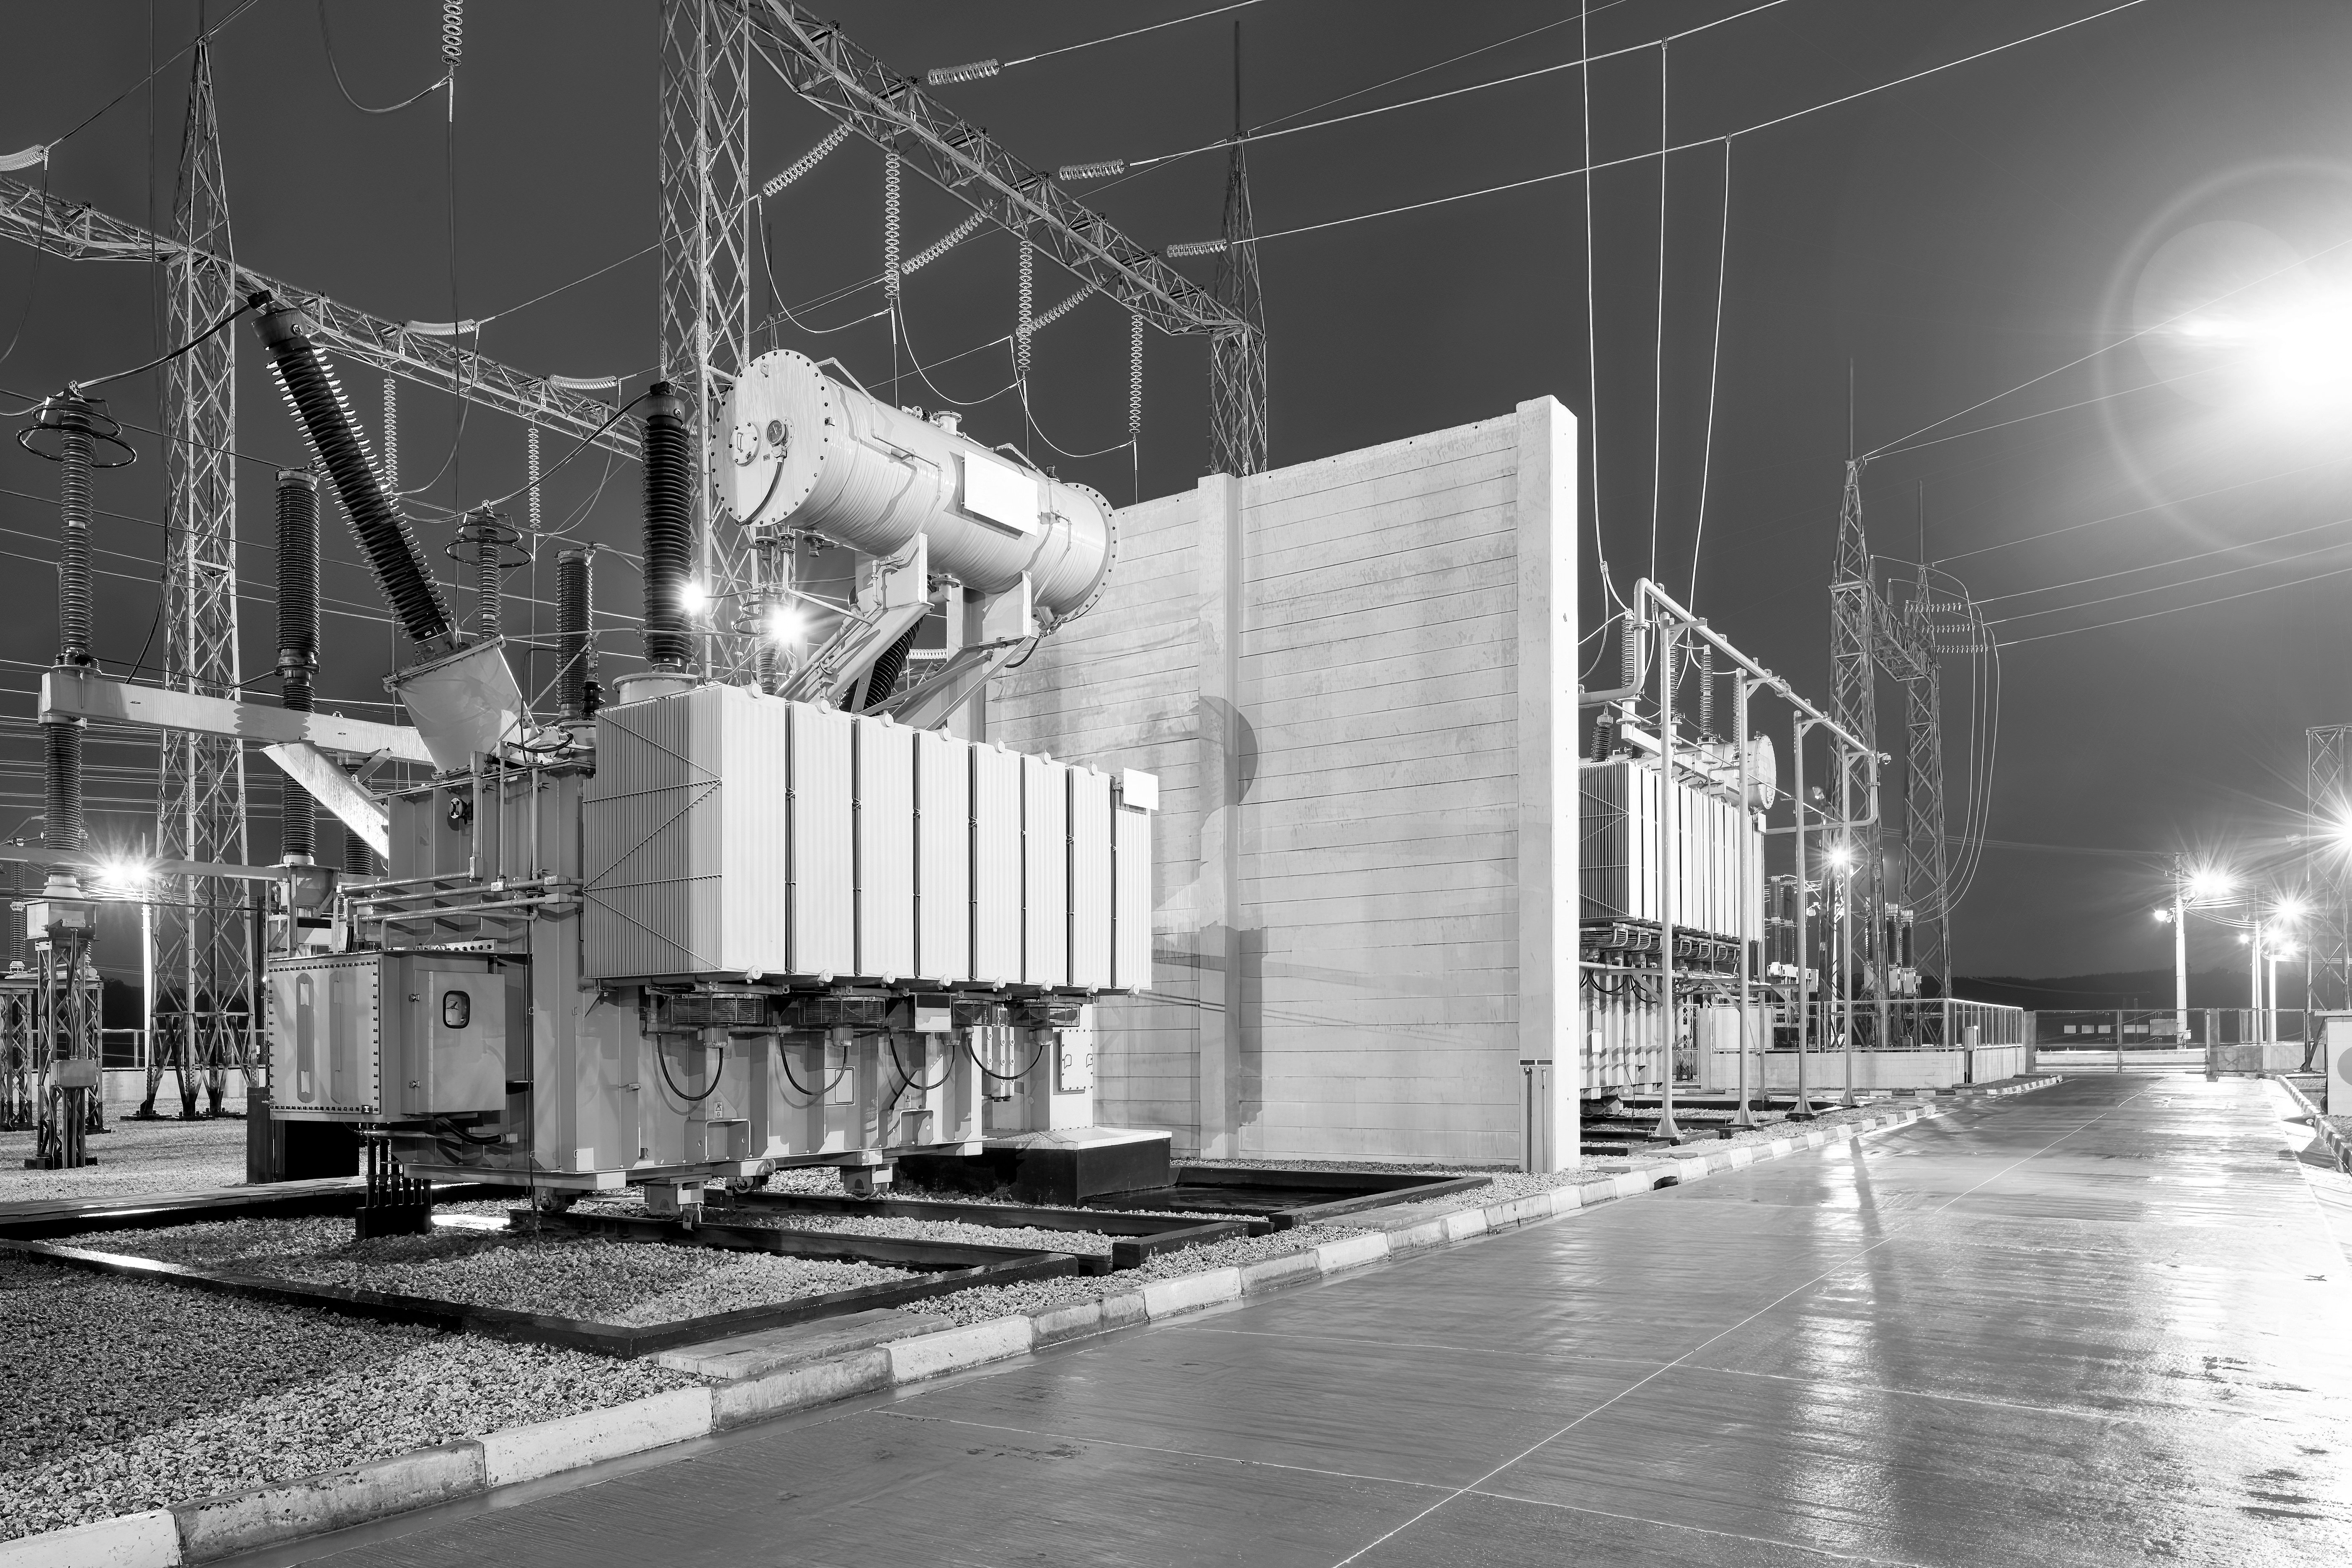 Electrical sub-stations